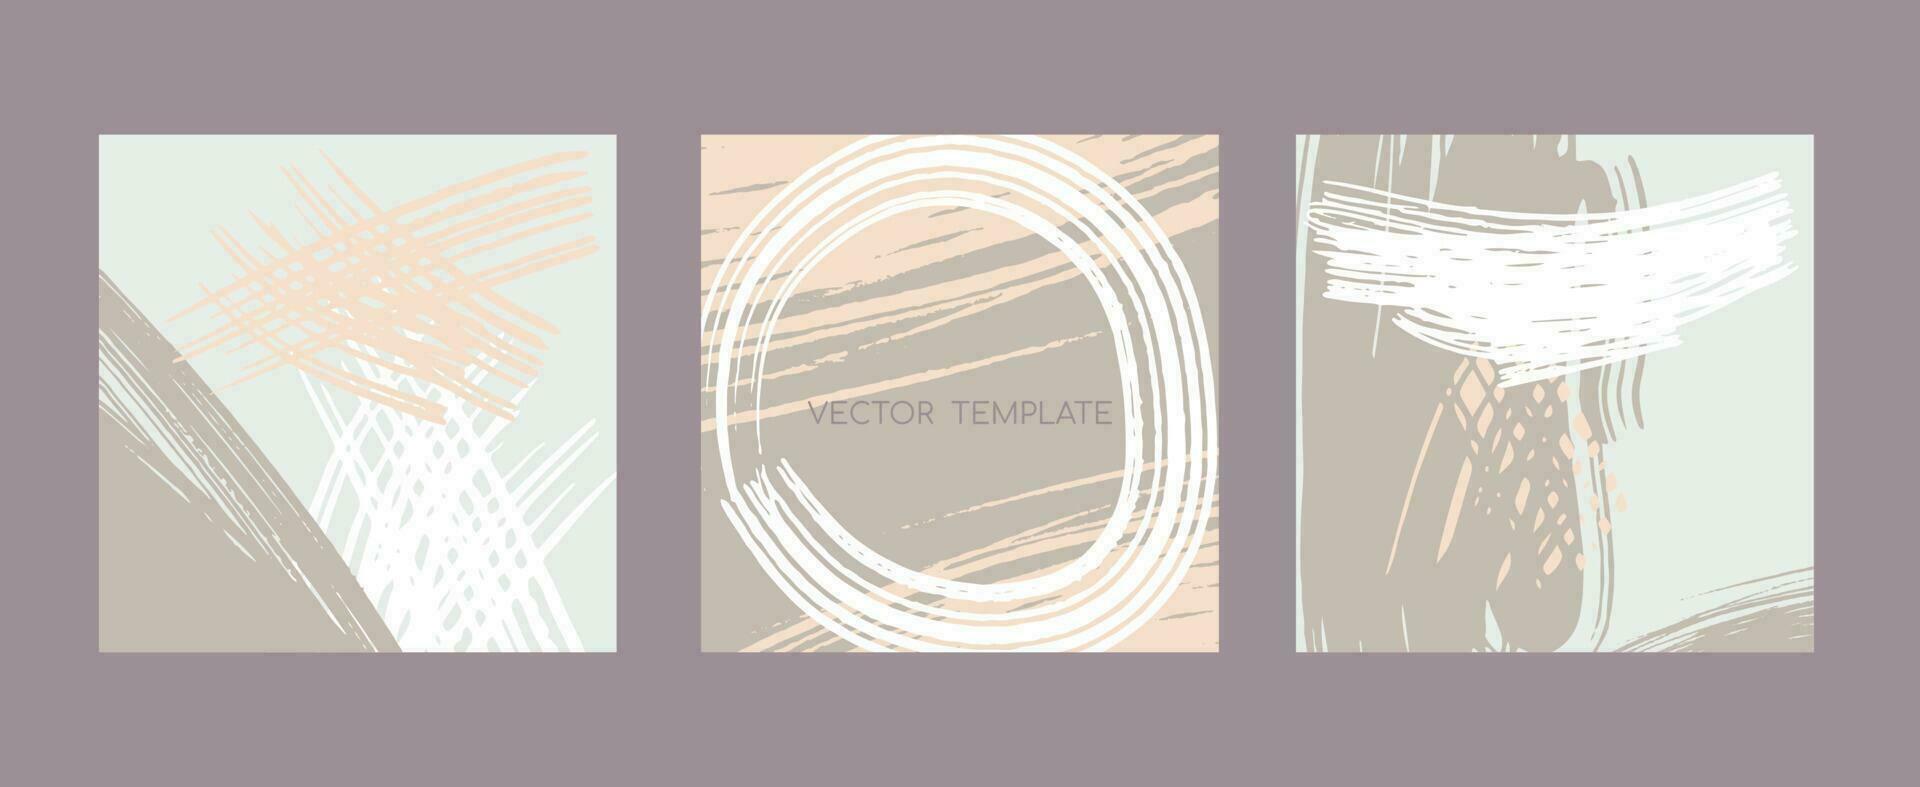 Modern vector layouts with hand drawn brush strokes and textures.